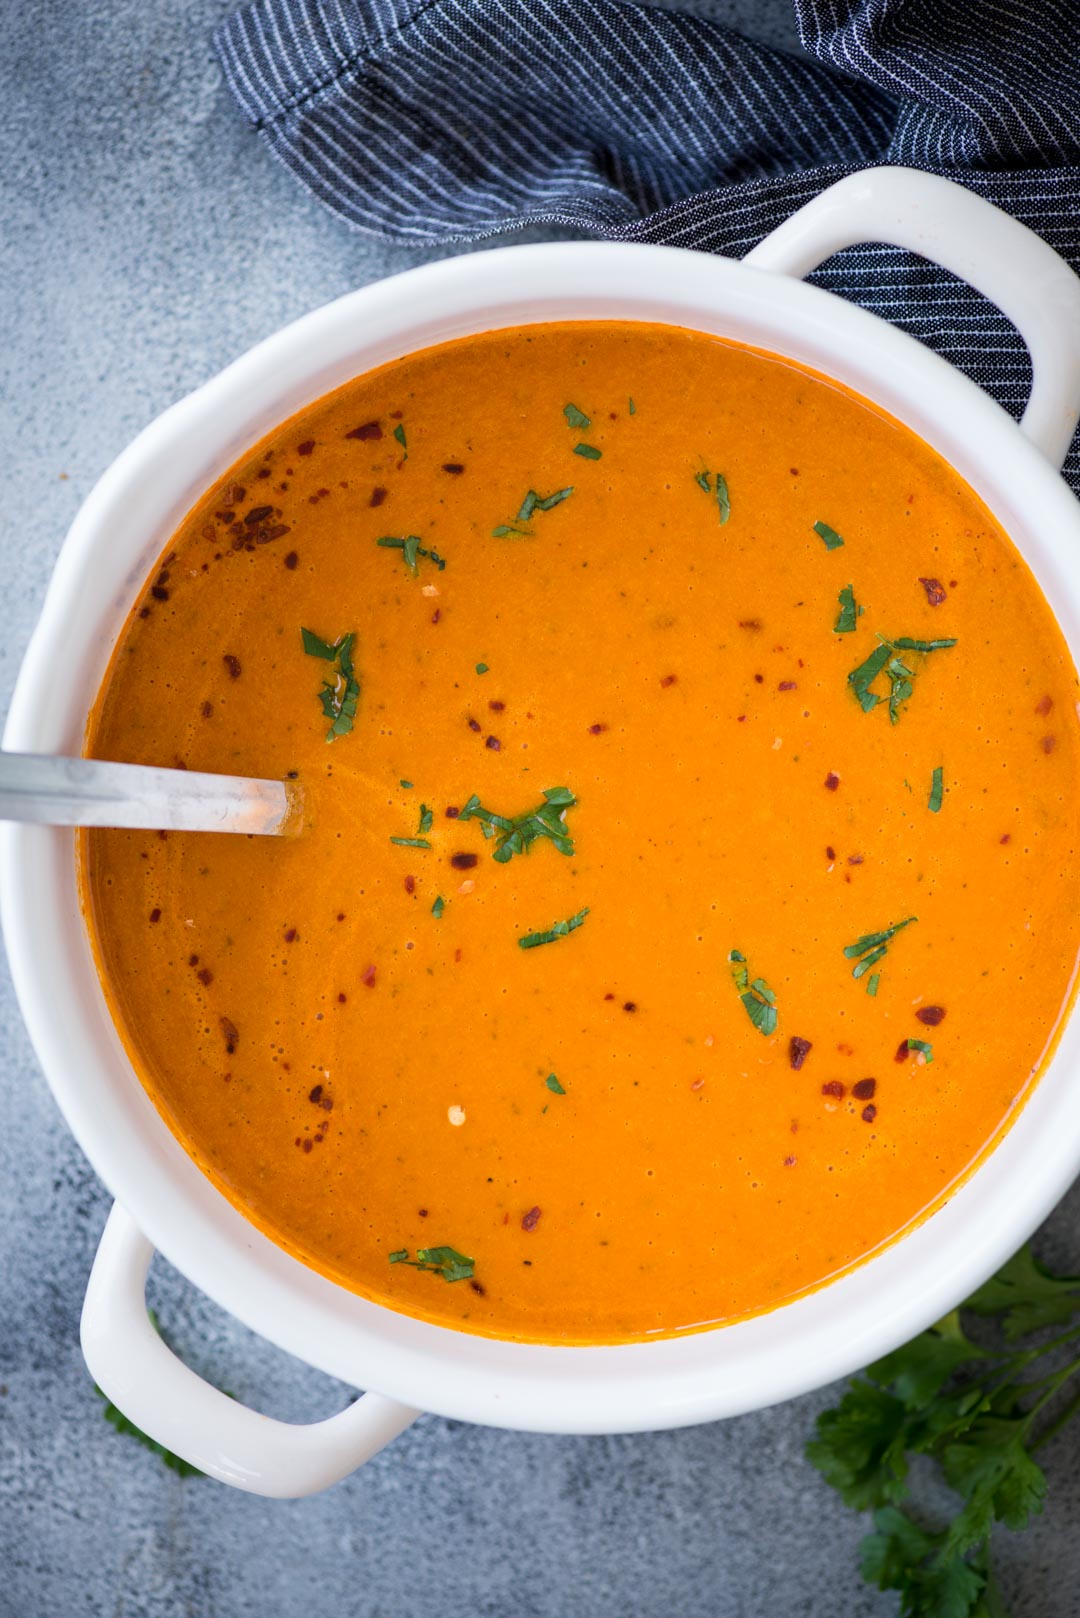 Thick and Creamy Tomato Bisque with a hint of tartness from the tomatoes, is the perfect soup for cold winter days. It is healthy, gluten-free and easy to make. Serve this with a big slice of crusty garlic cheese toast or grilled cheese.